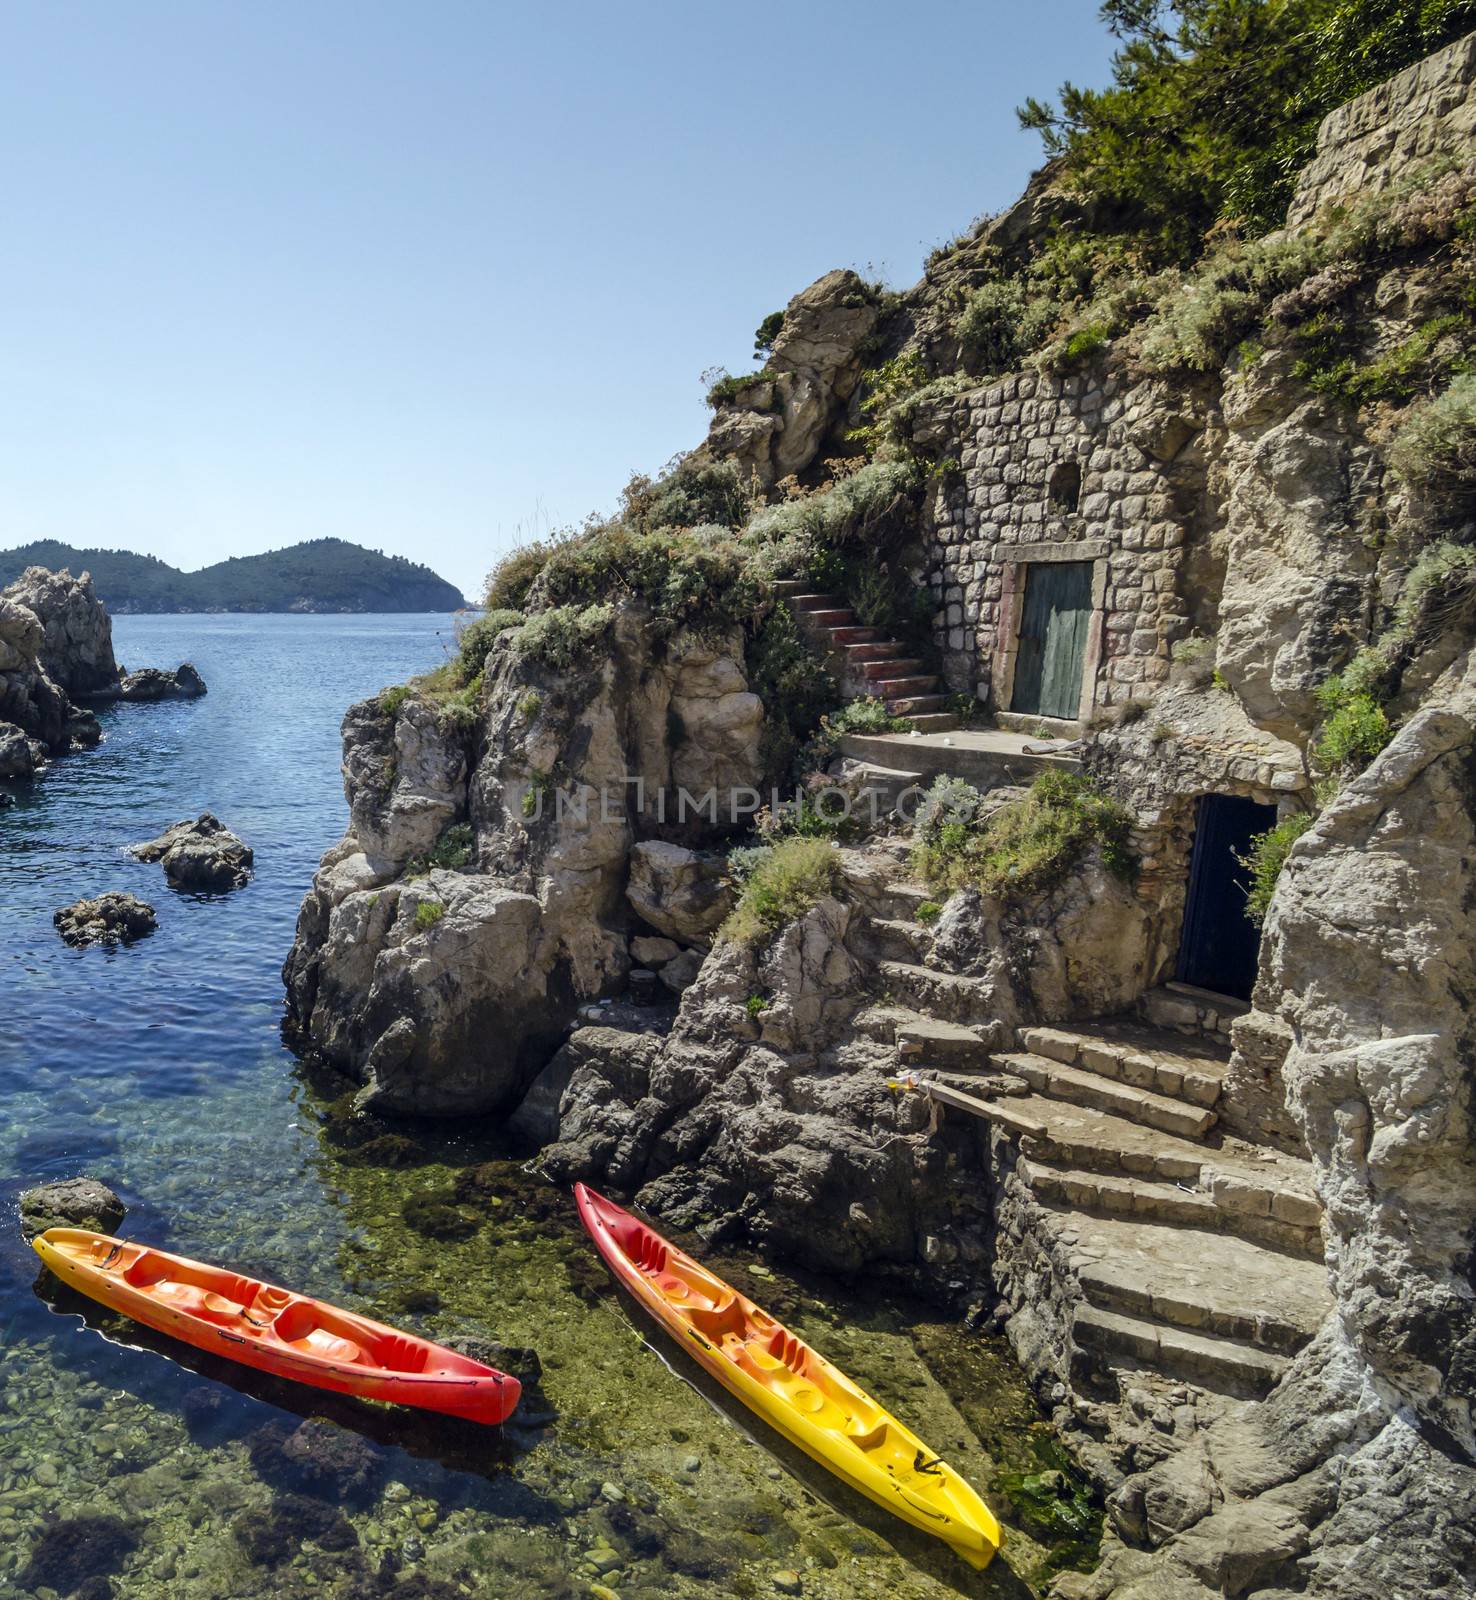 Pair of kayaks in front of a cliffside warehouses.